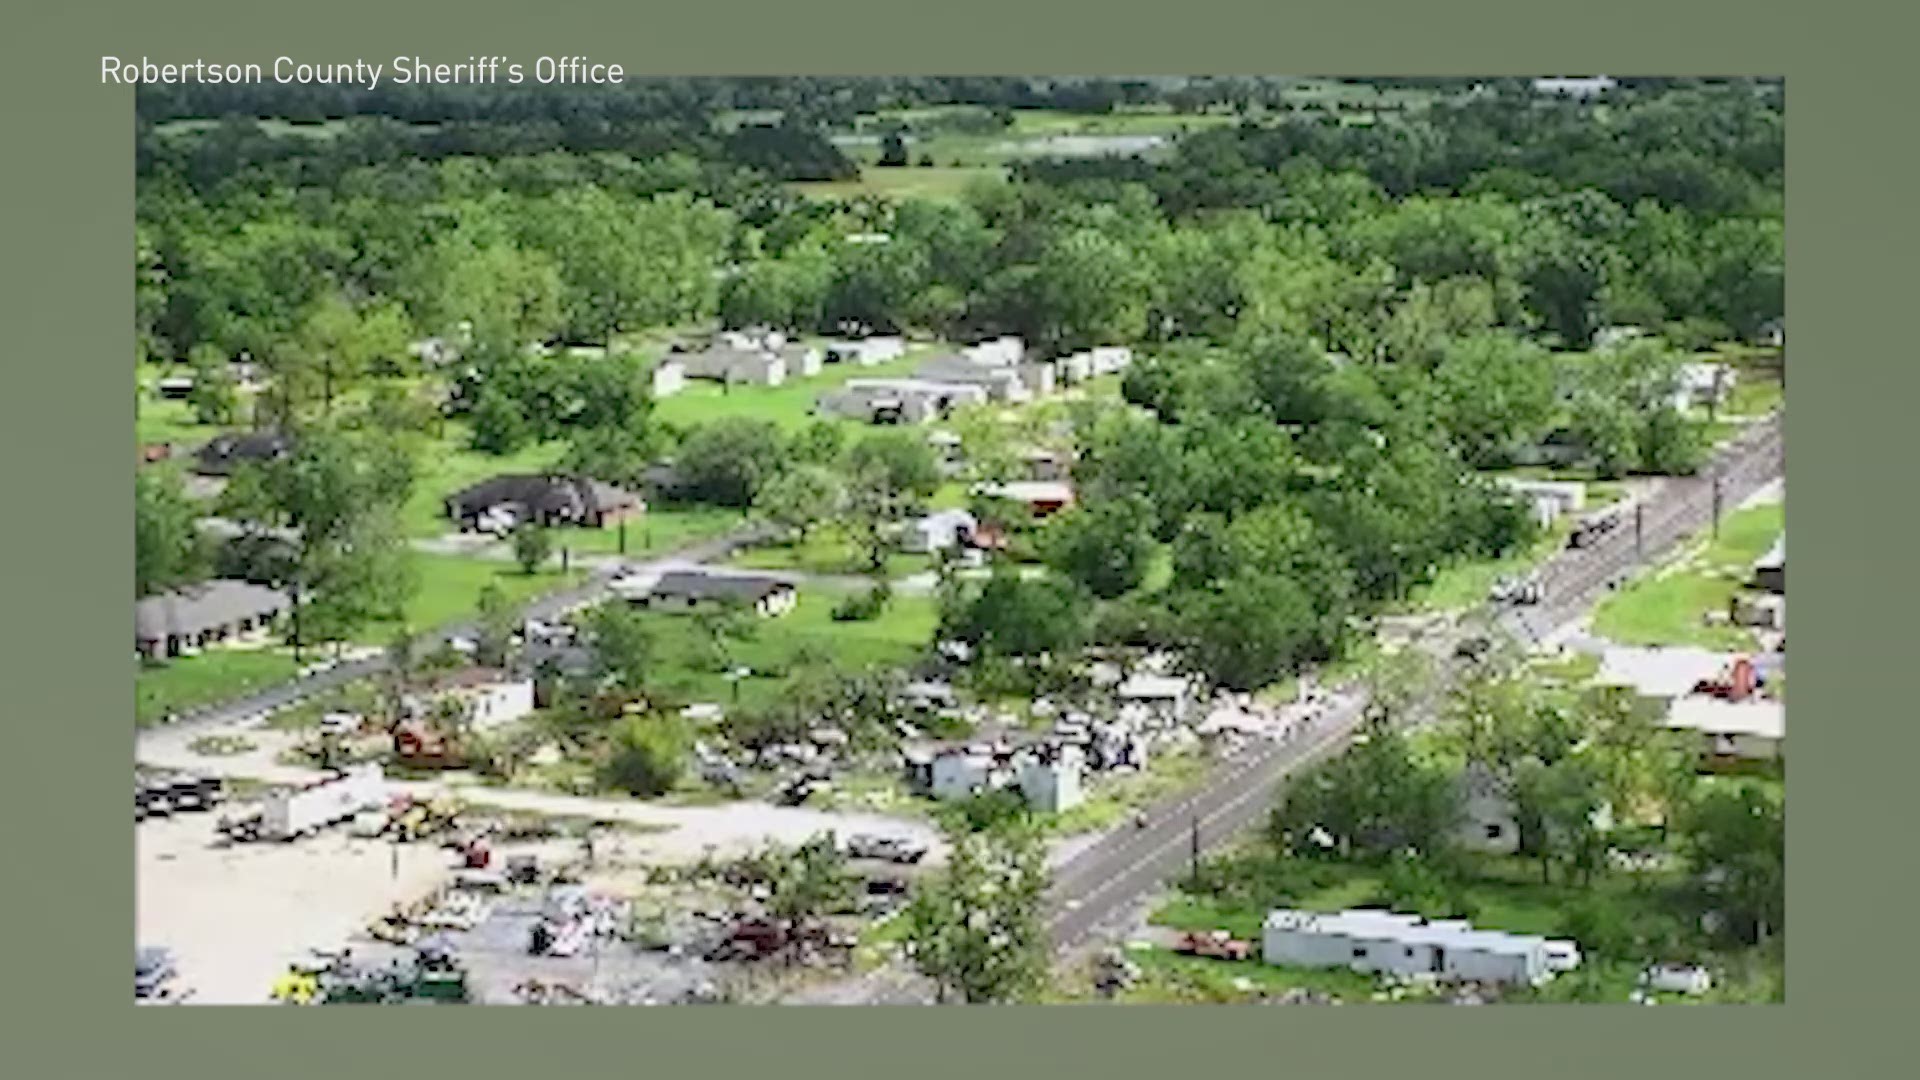 Video from the Robertson County Sheriff's Office shows damage after a strong storm hit the area on April 13, 2019.